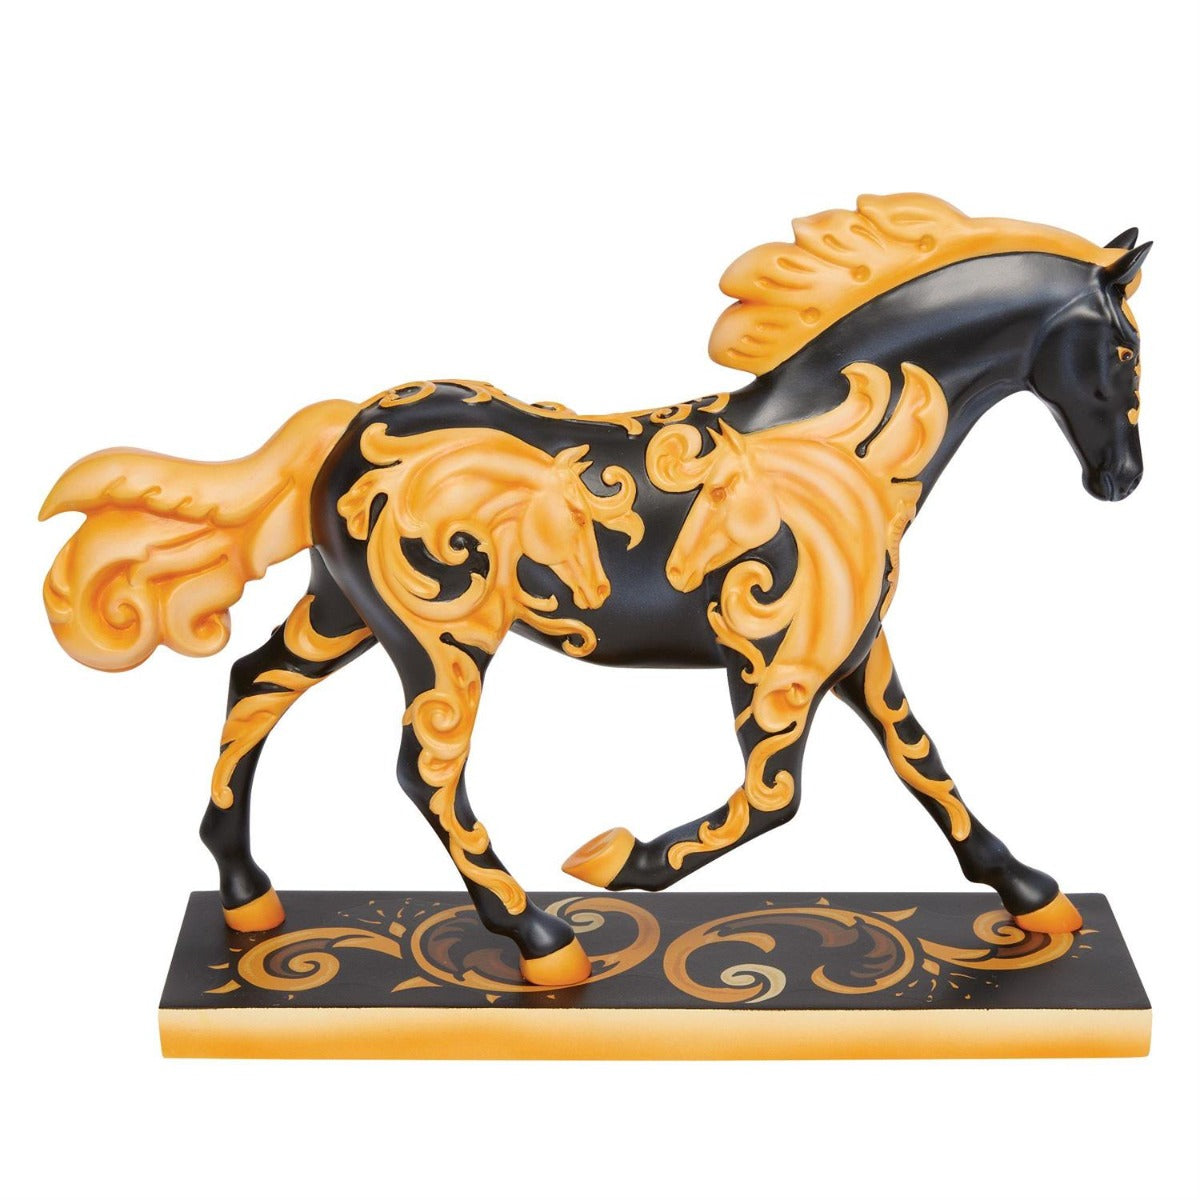 Enesco "Horse Dreams" Trail of the Painted Ponies Figurine